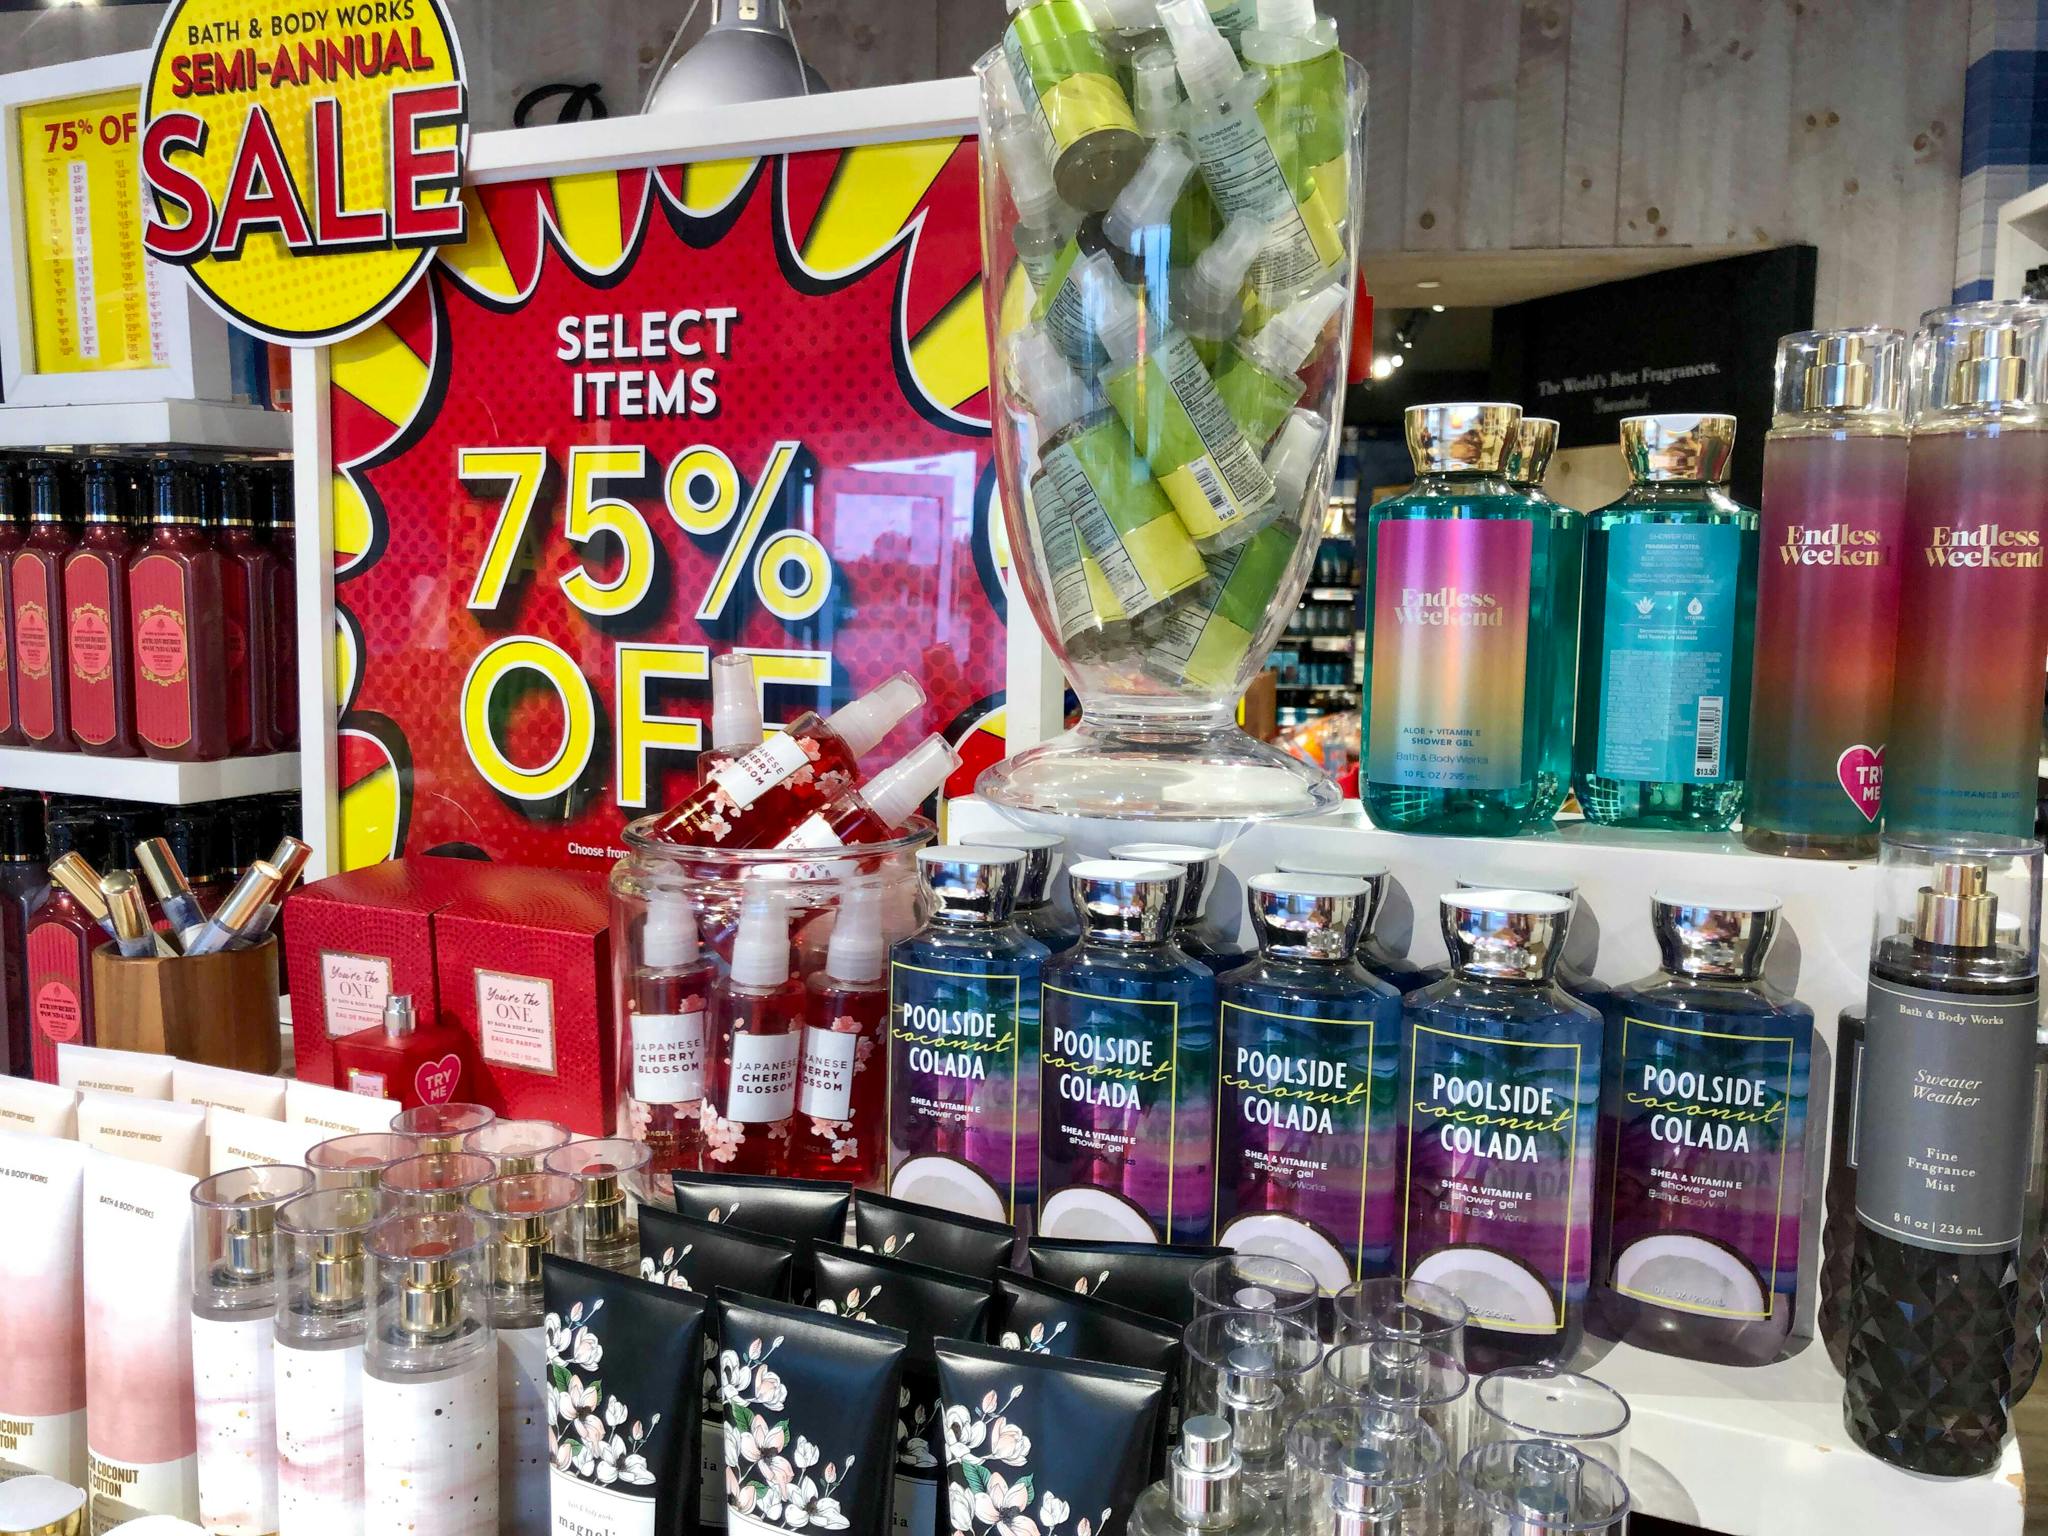 A display for the Bath & Body Works Semi-Annual Sale with a 75% off sign and body care products